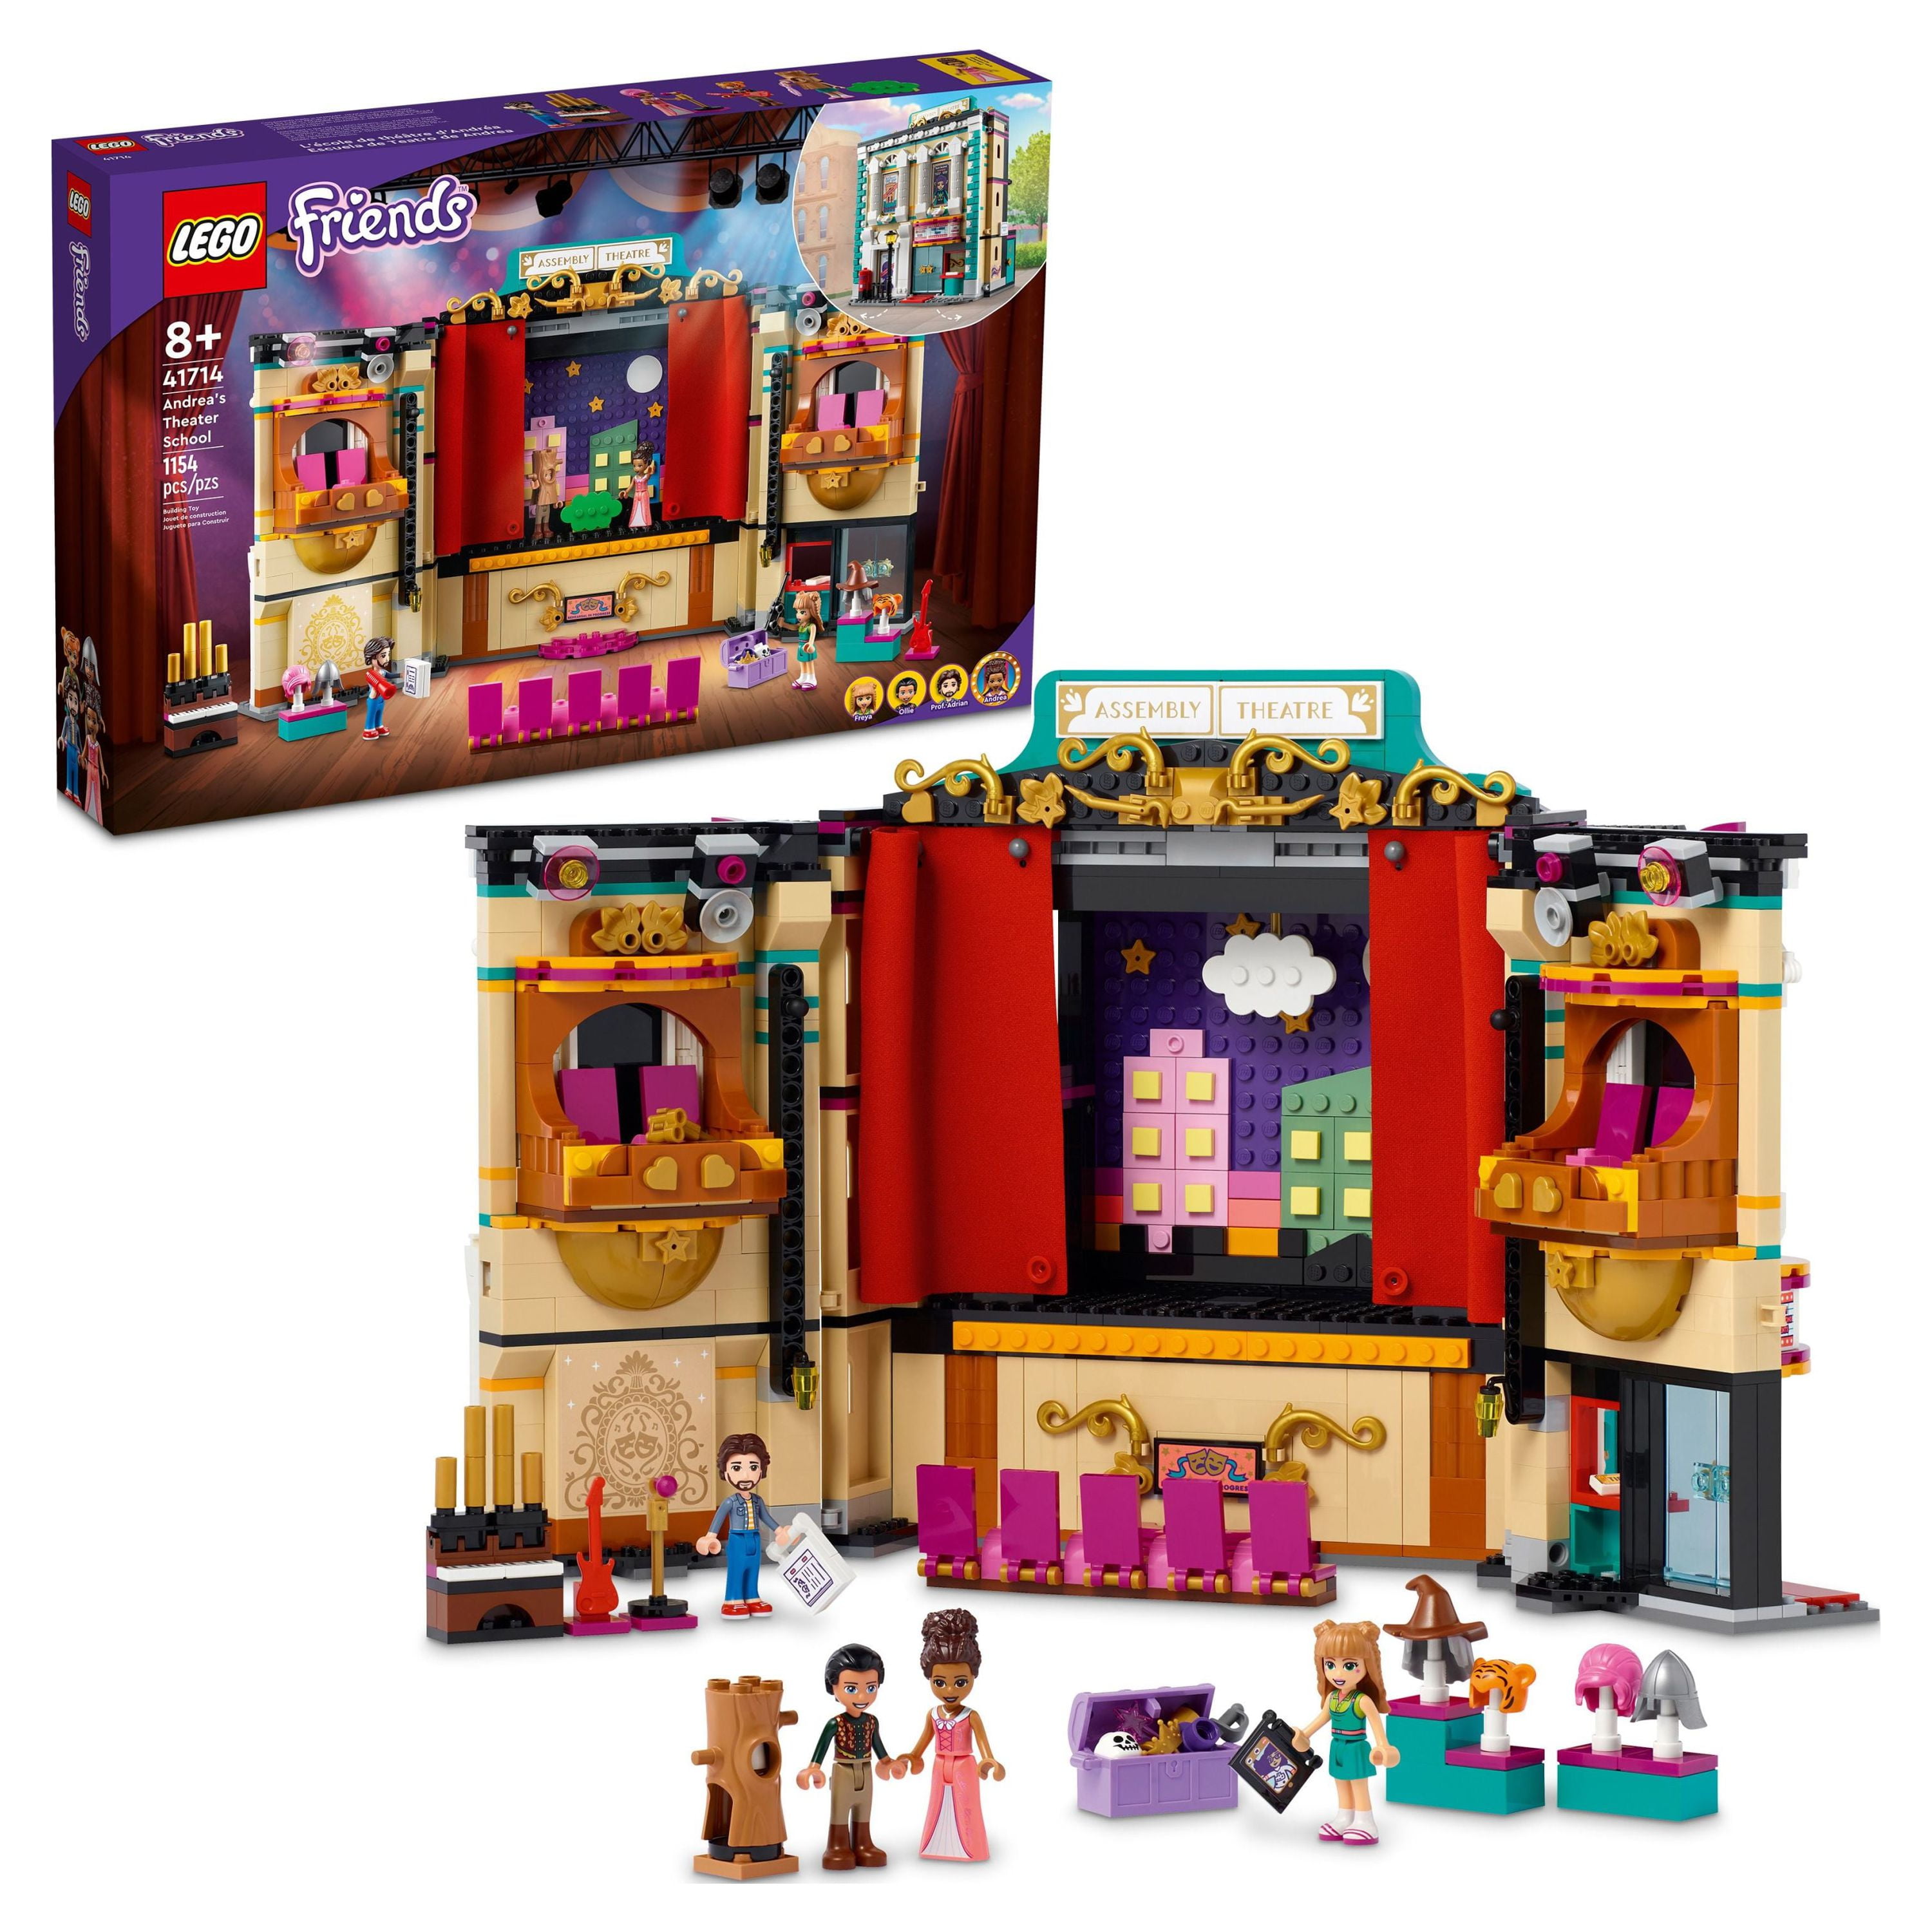 LEGO Friends Andrea's Theater School Playset, 41714 Creative Toy, Gift Idea  for Kids, Girls and Boys 8 Plus Years Old with 4 Mini-Dolls and Props  Accessories 